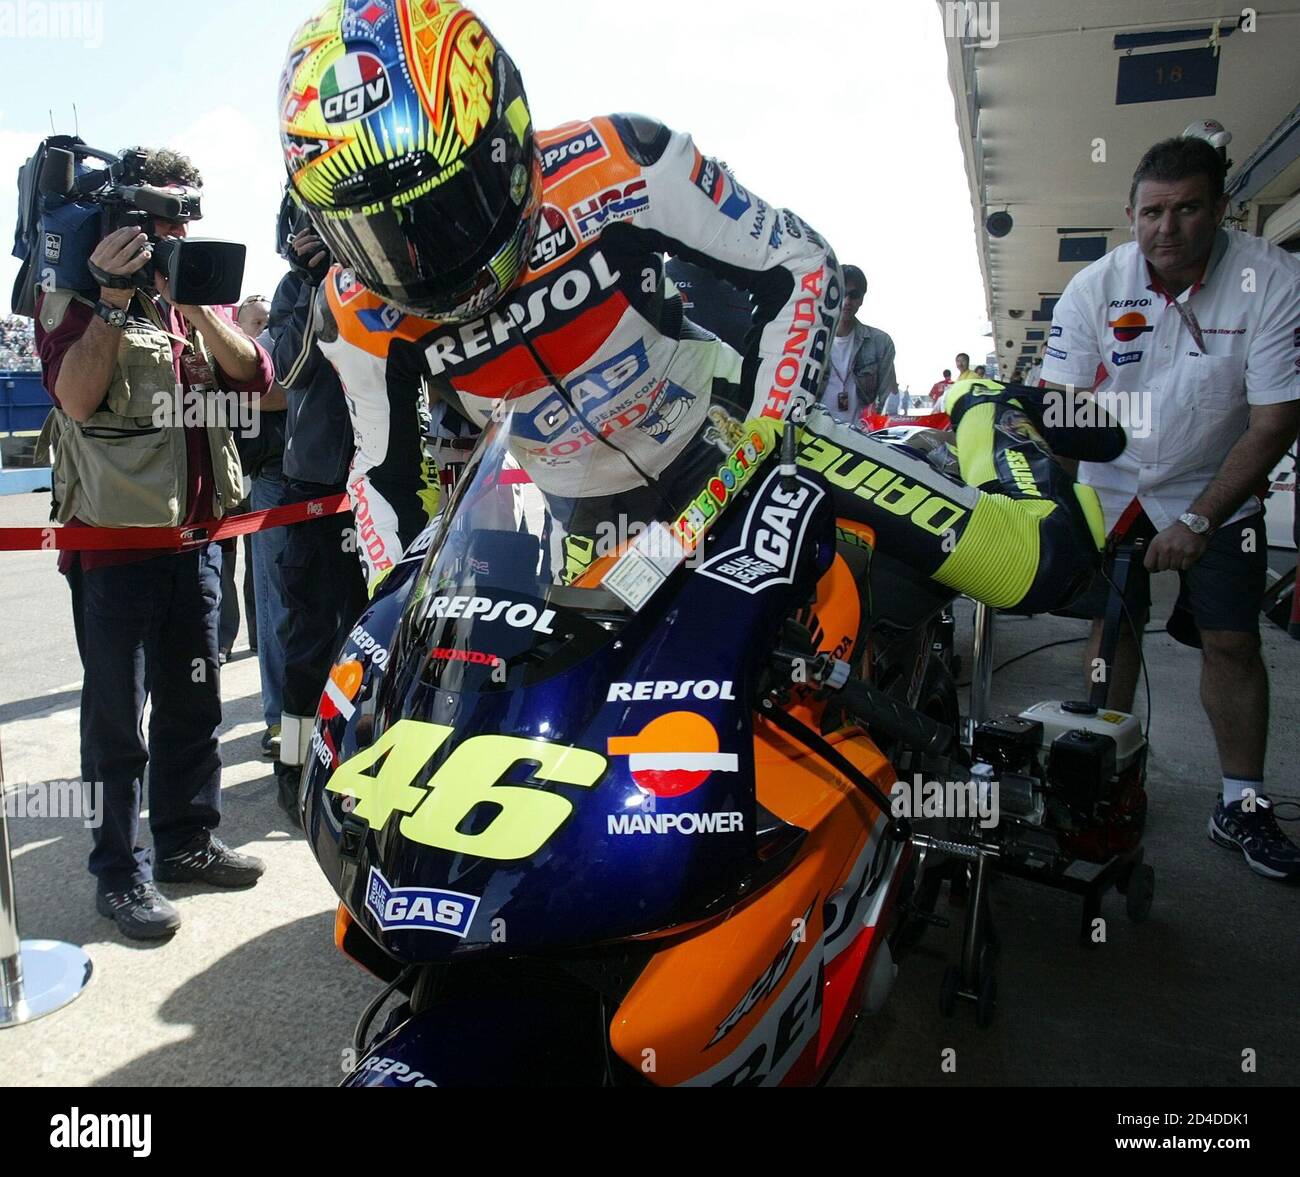 Italy's Valentino Rossi climbs onto his motorcycle after medical checks  prior to the second free practice session for the British motorcycling  Grand Prix at Donington Park circuit July 13, 2002. Rossi, riding